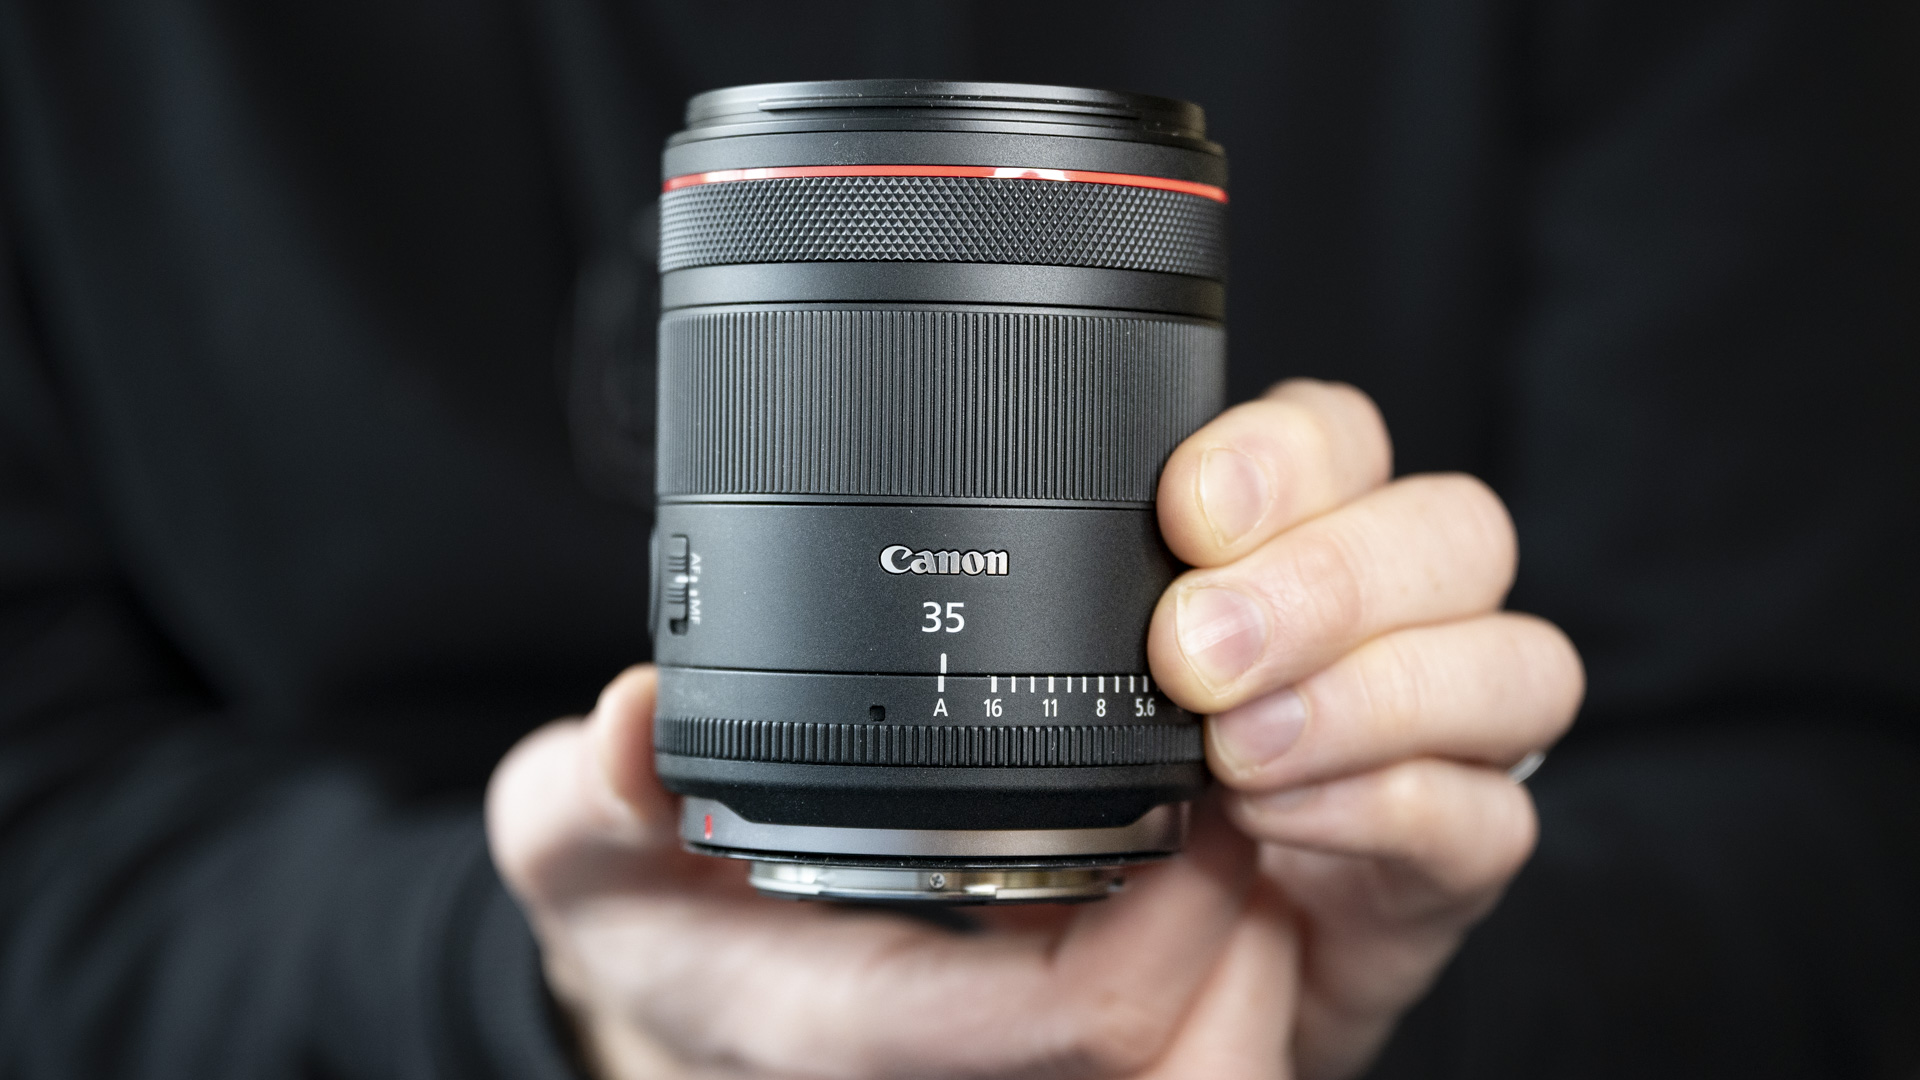 The Canon RF 35mm F1.4 lens in your hand